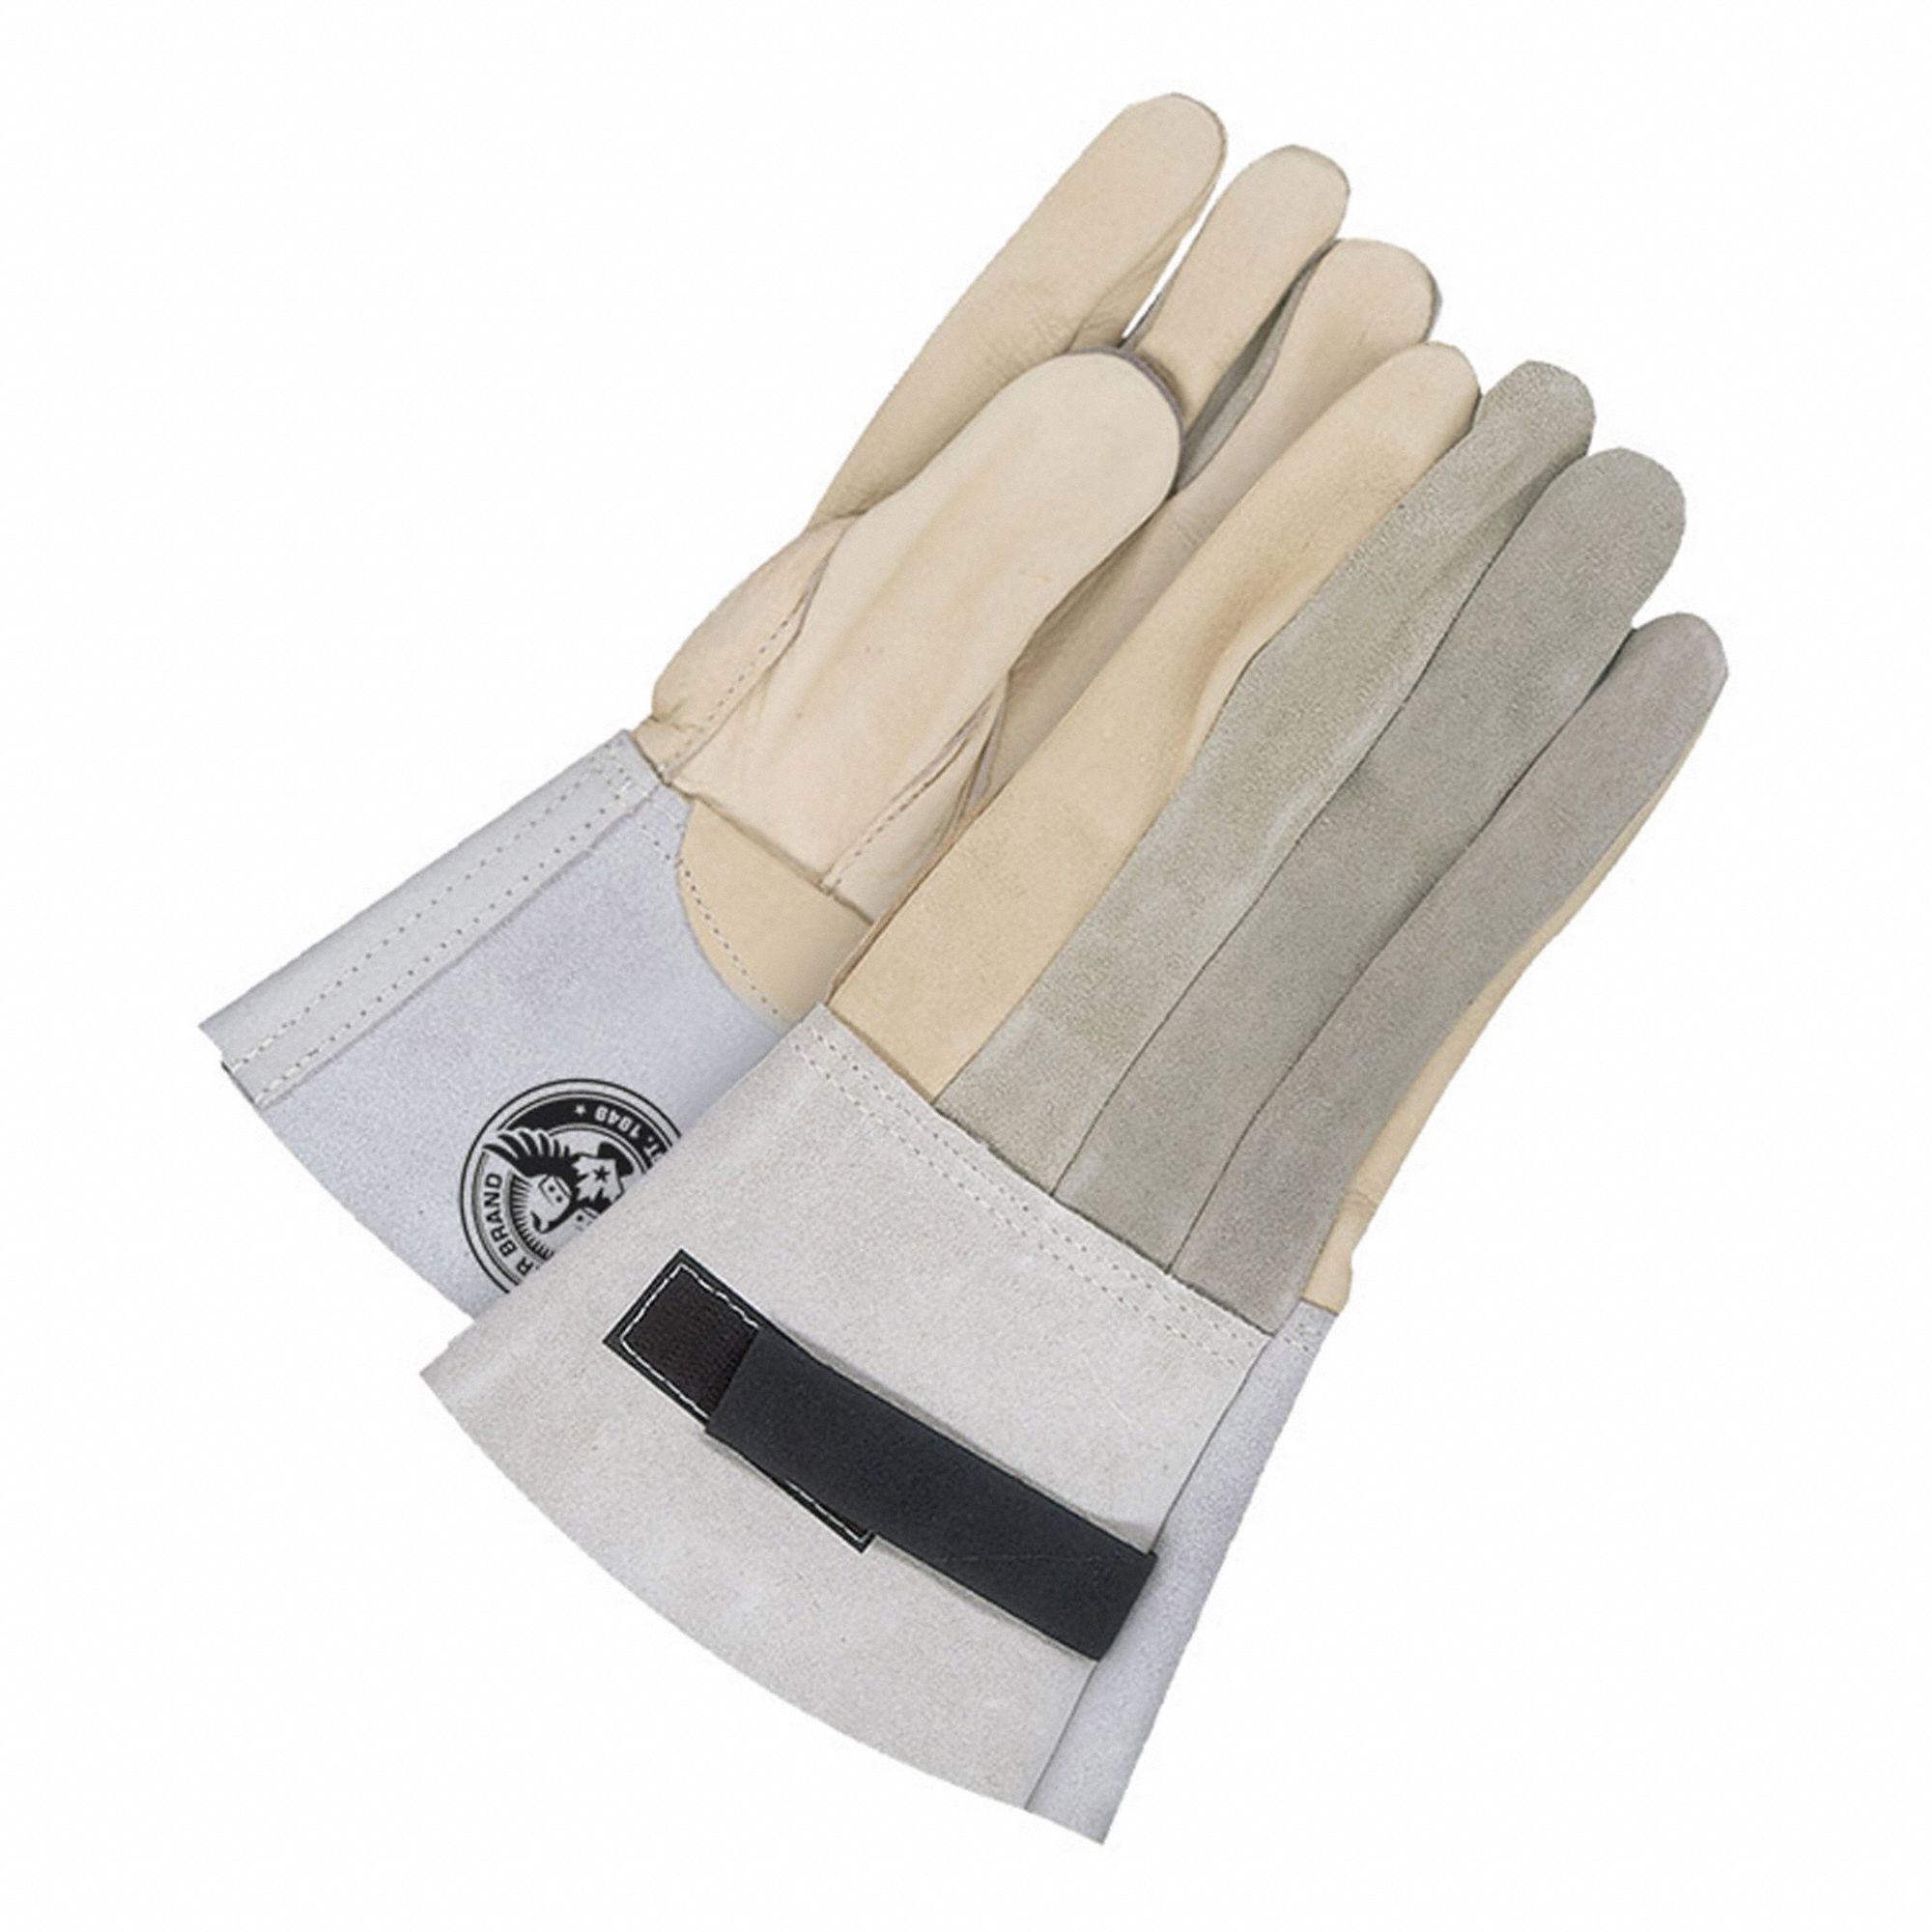 BOB DALE UTILITY GLOVES W HOOK AND LOOP STRAP, SIZE 9, GRAIN